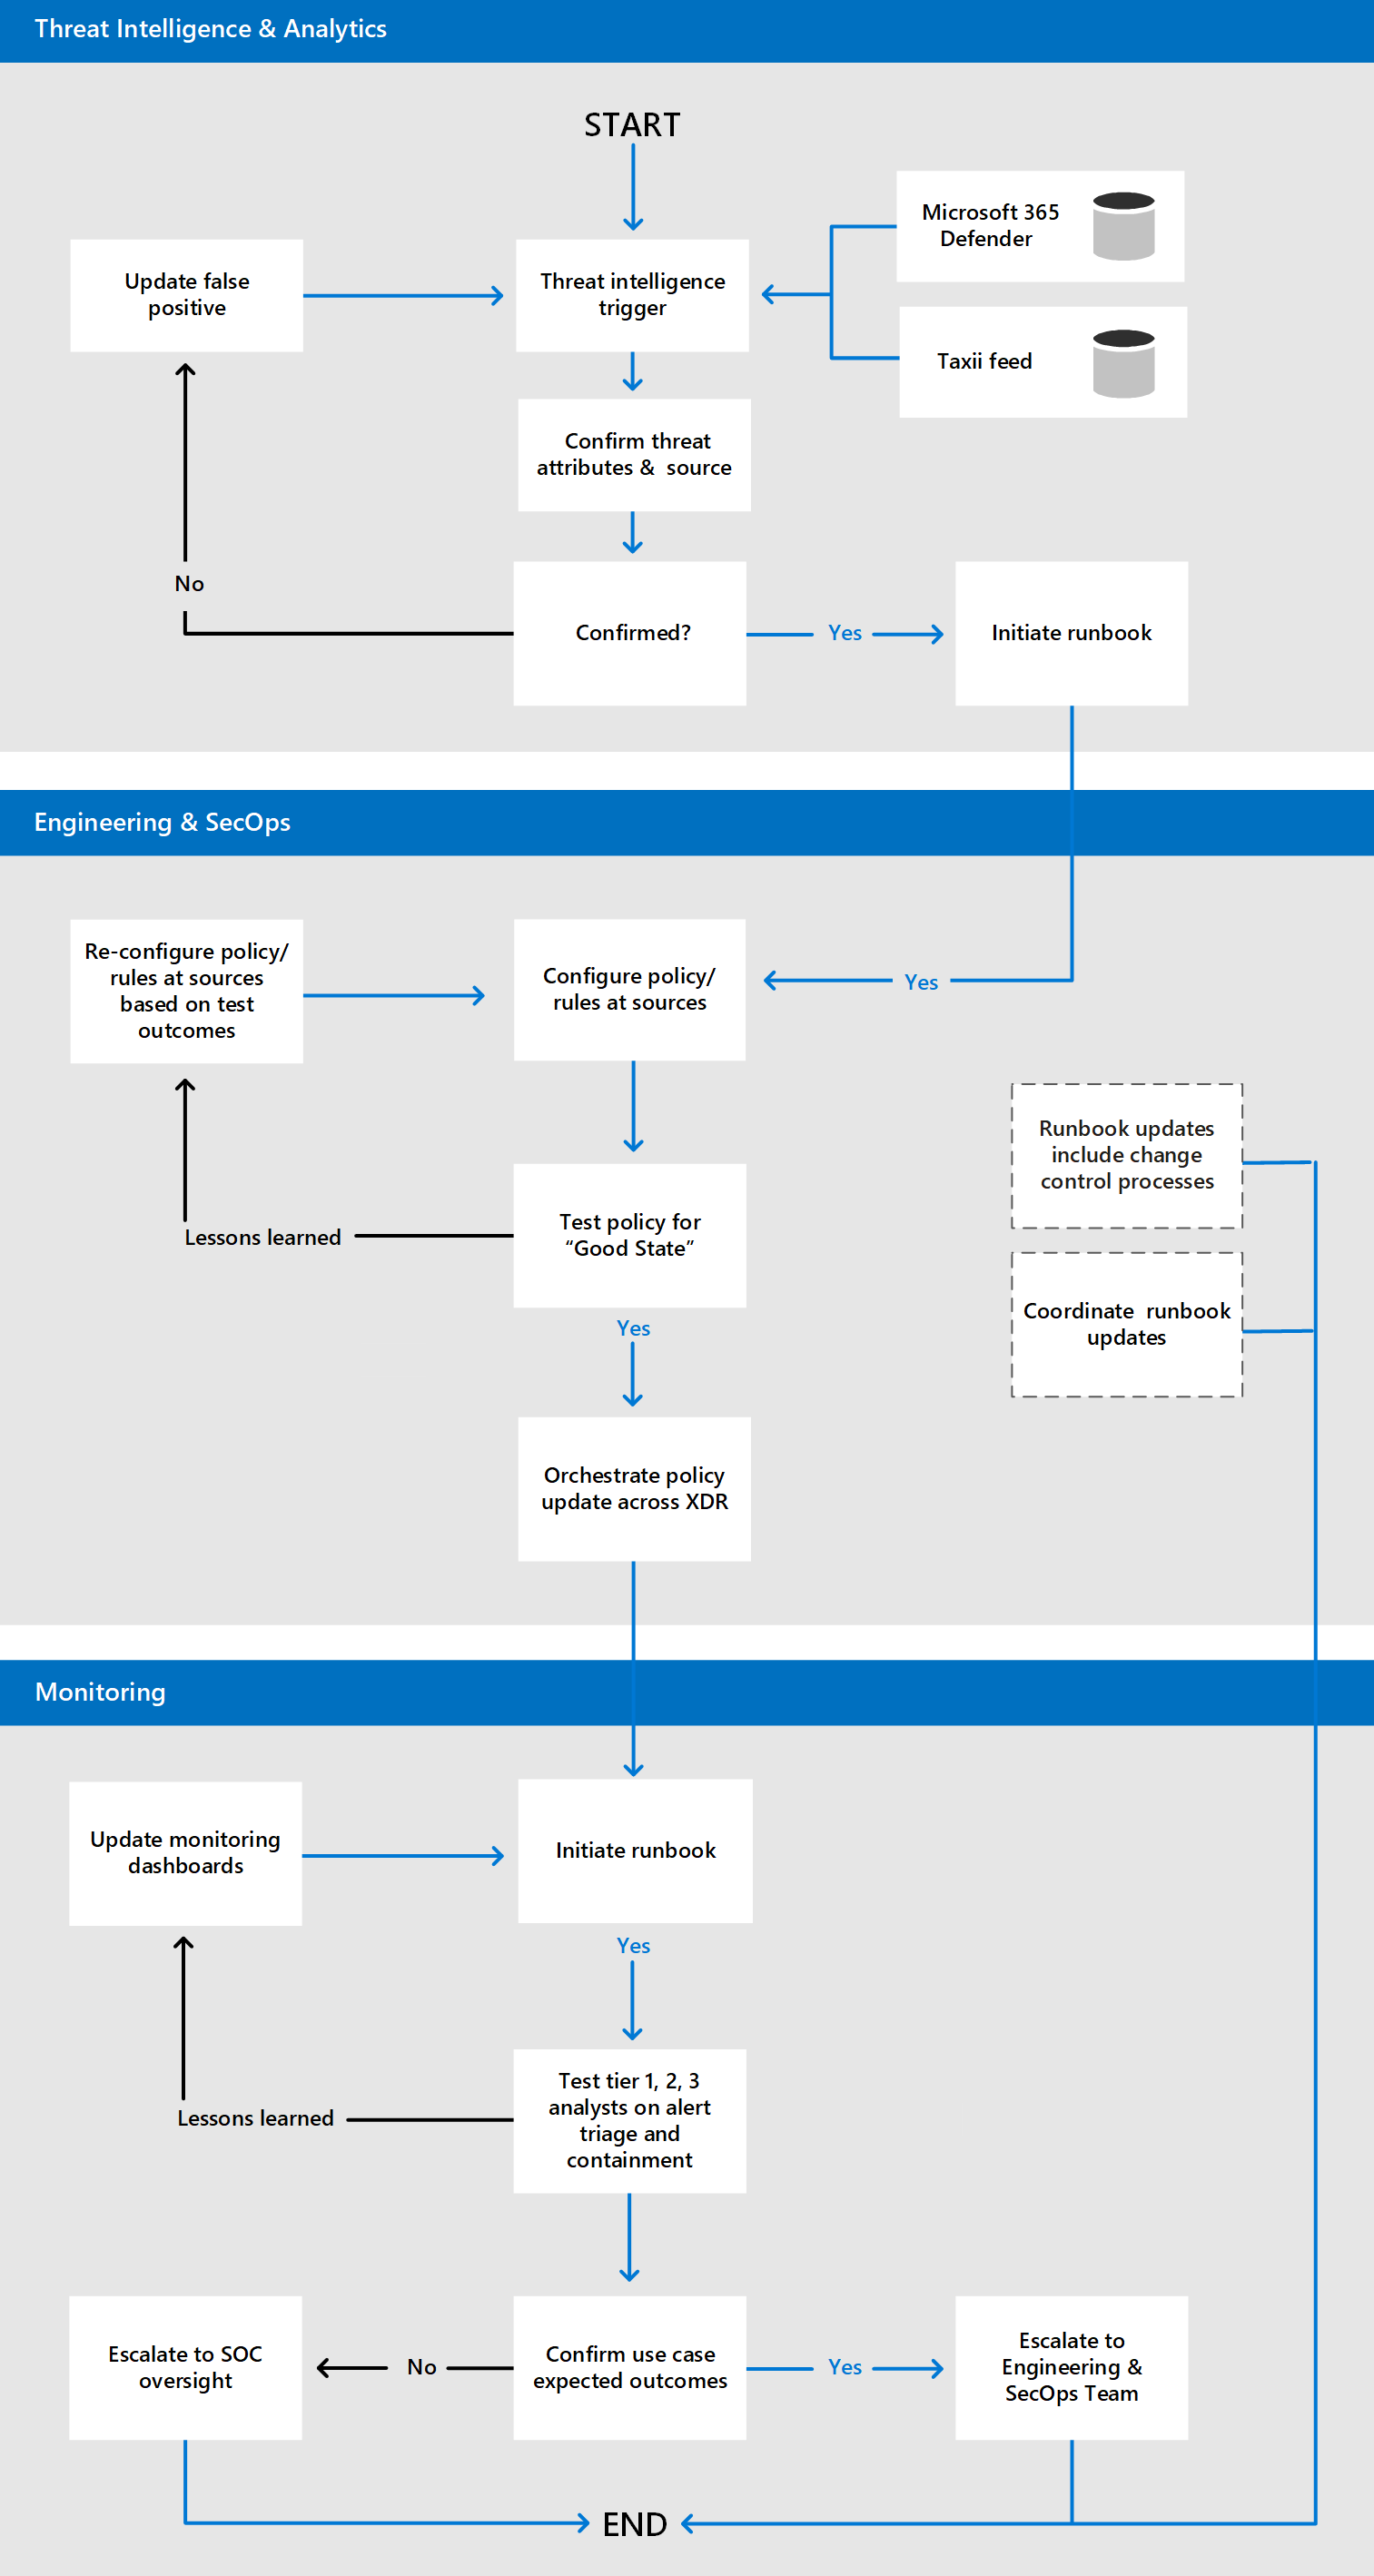 An example of a detailed use case workflow for an anti-phishing campaign.